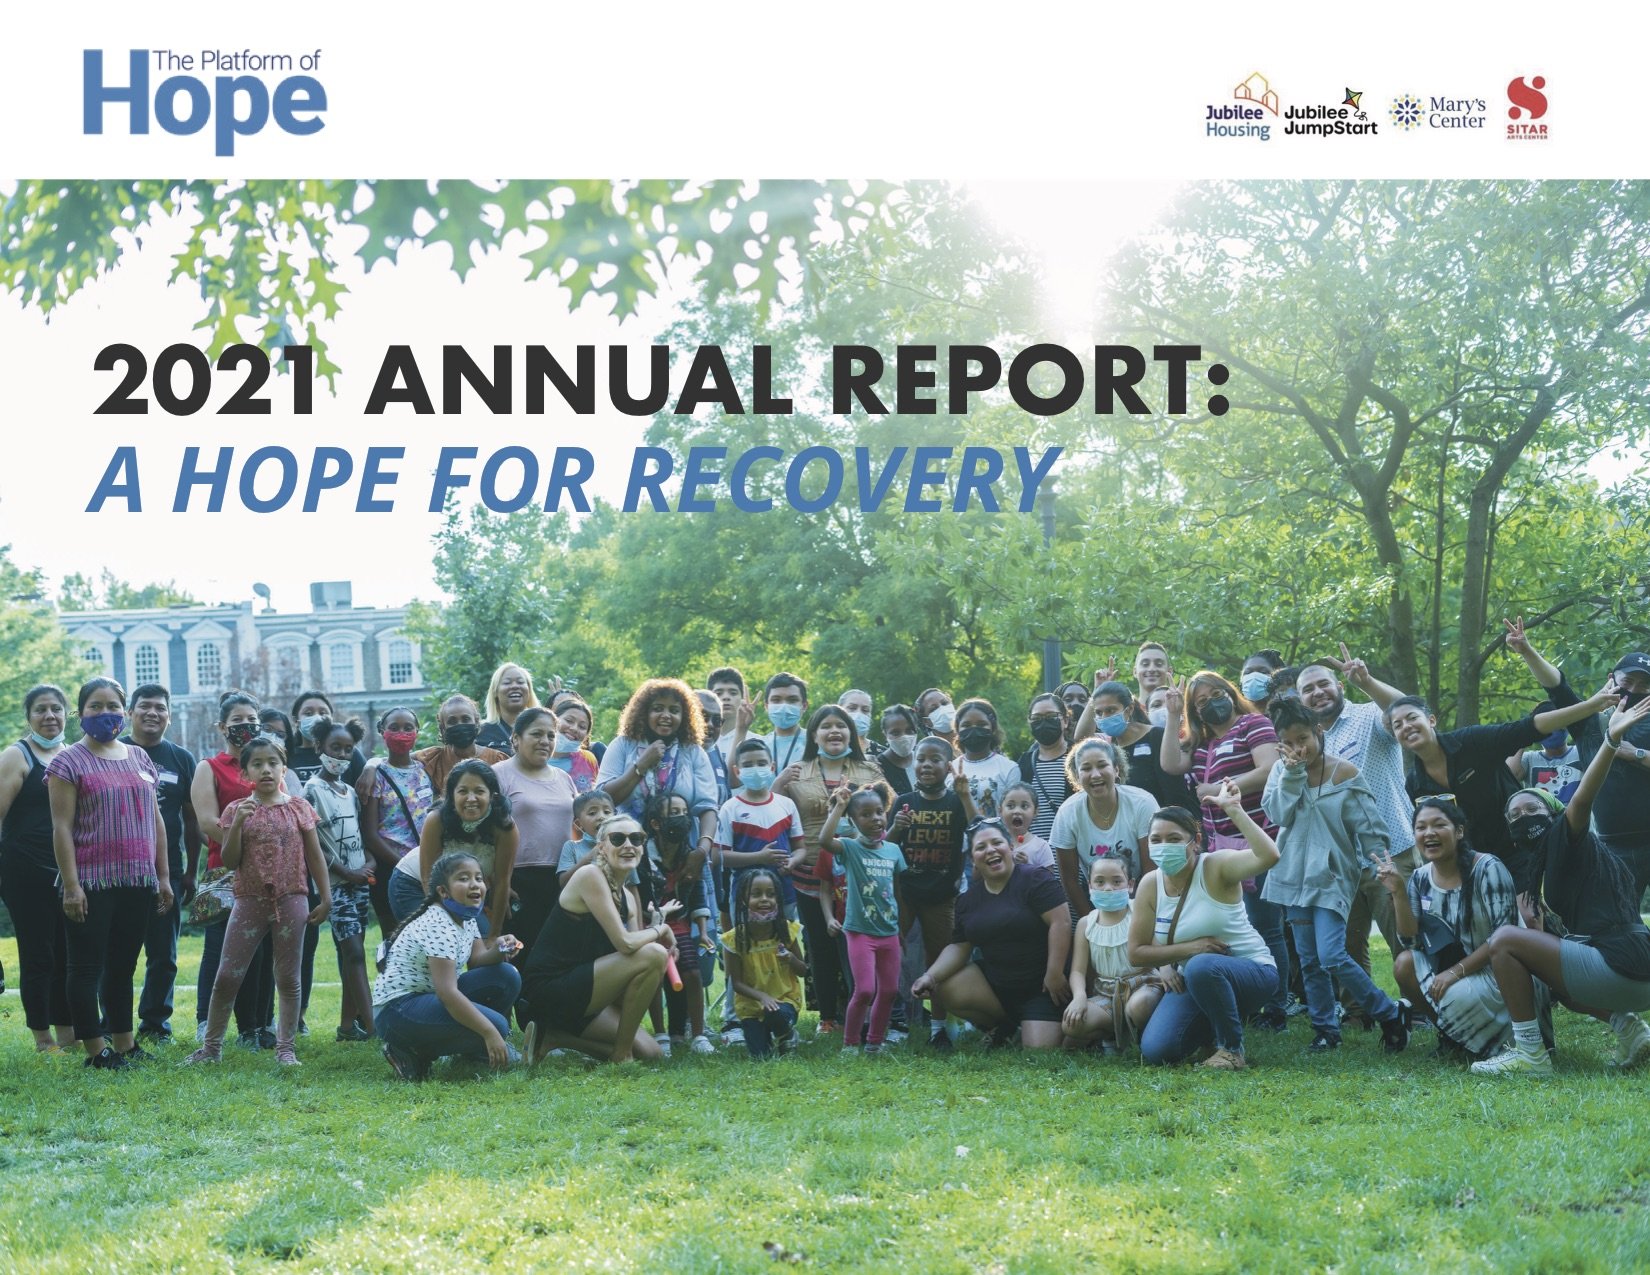 POH 2021 Annual Report cover.jpg